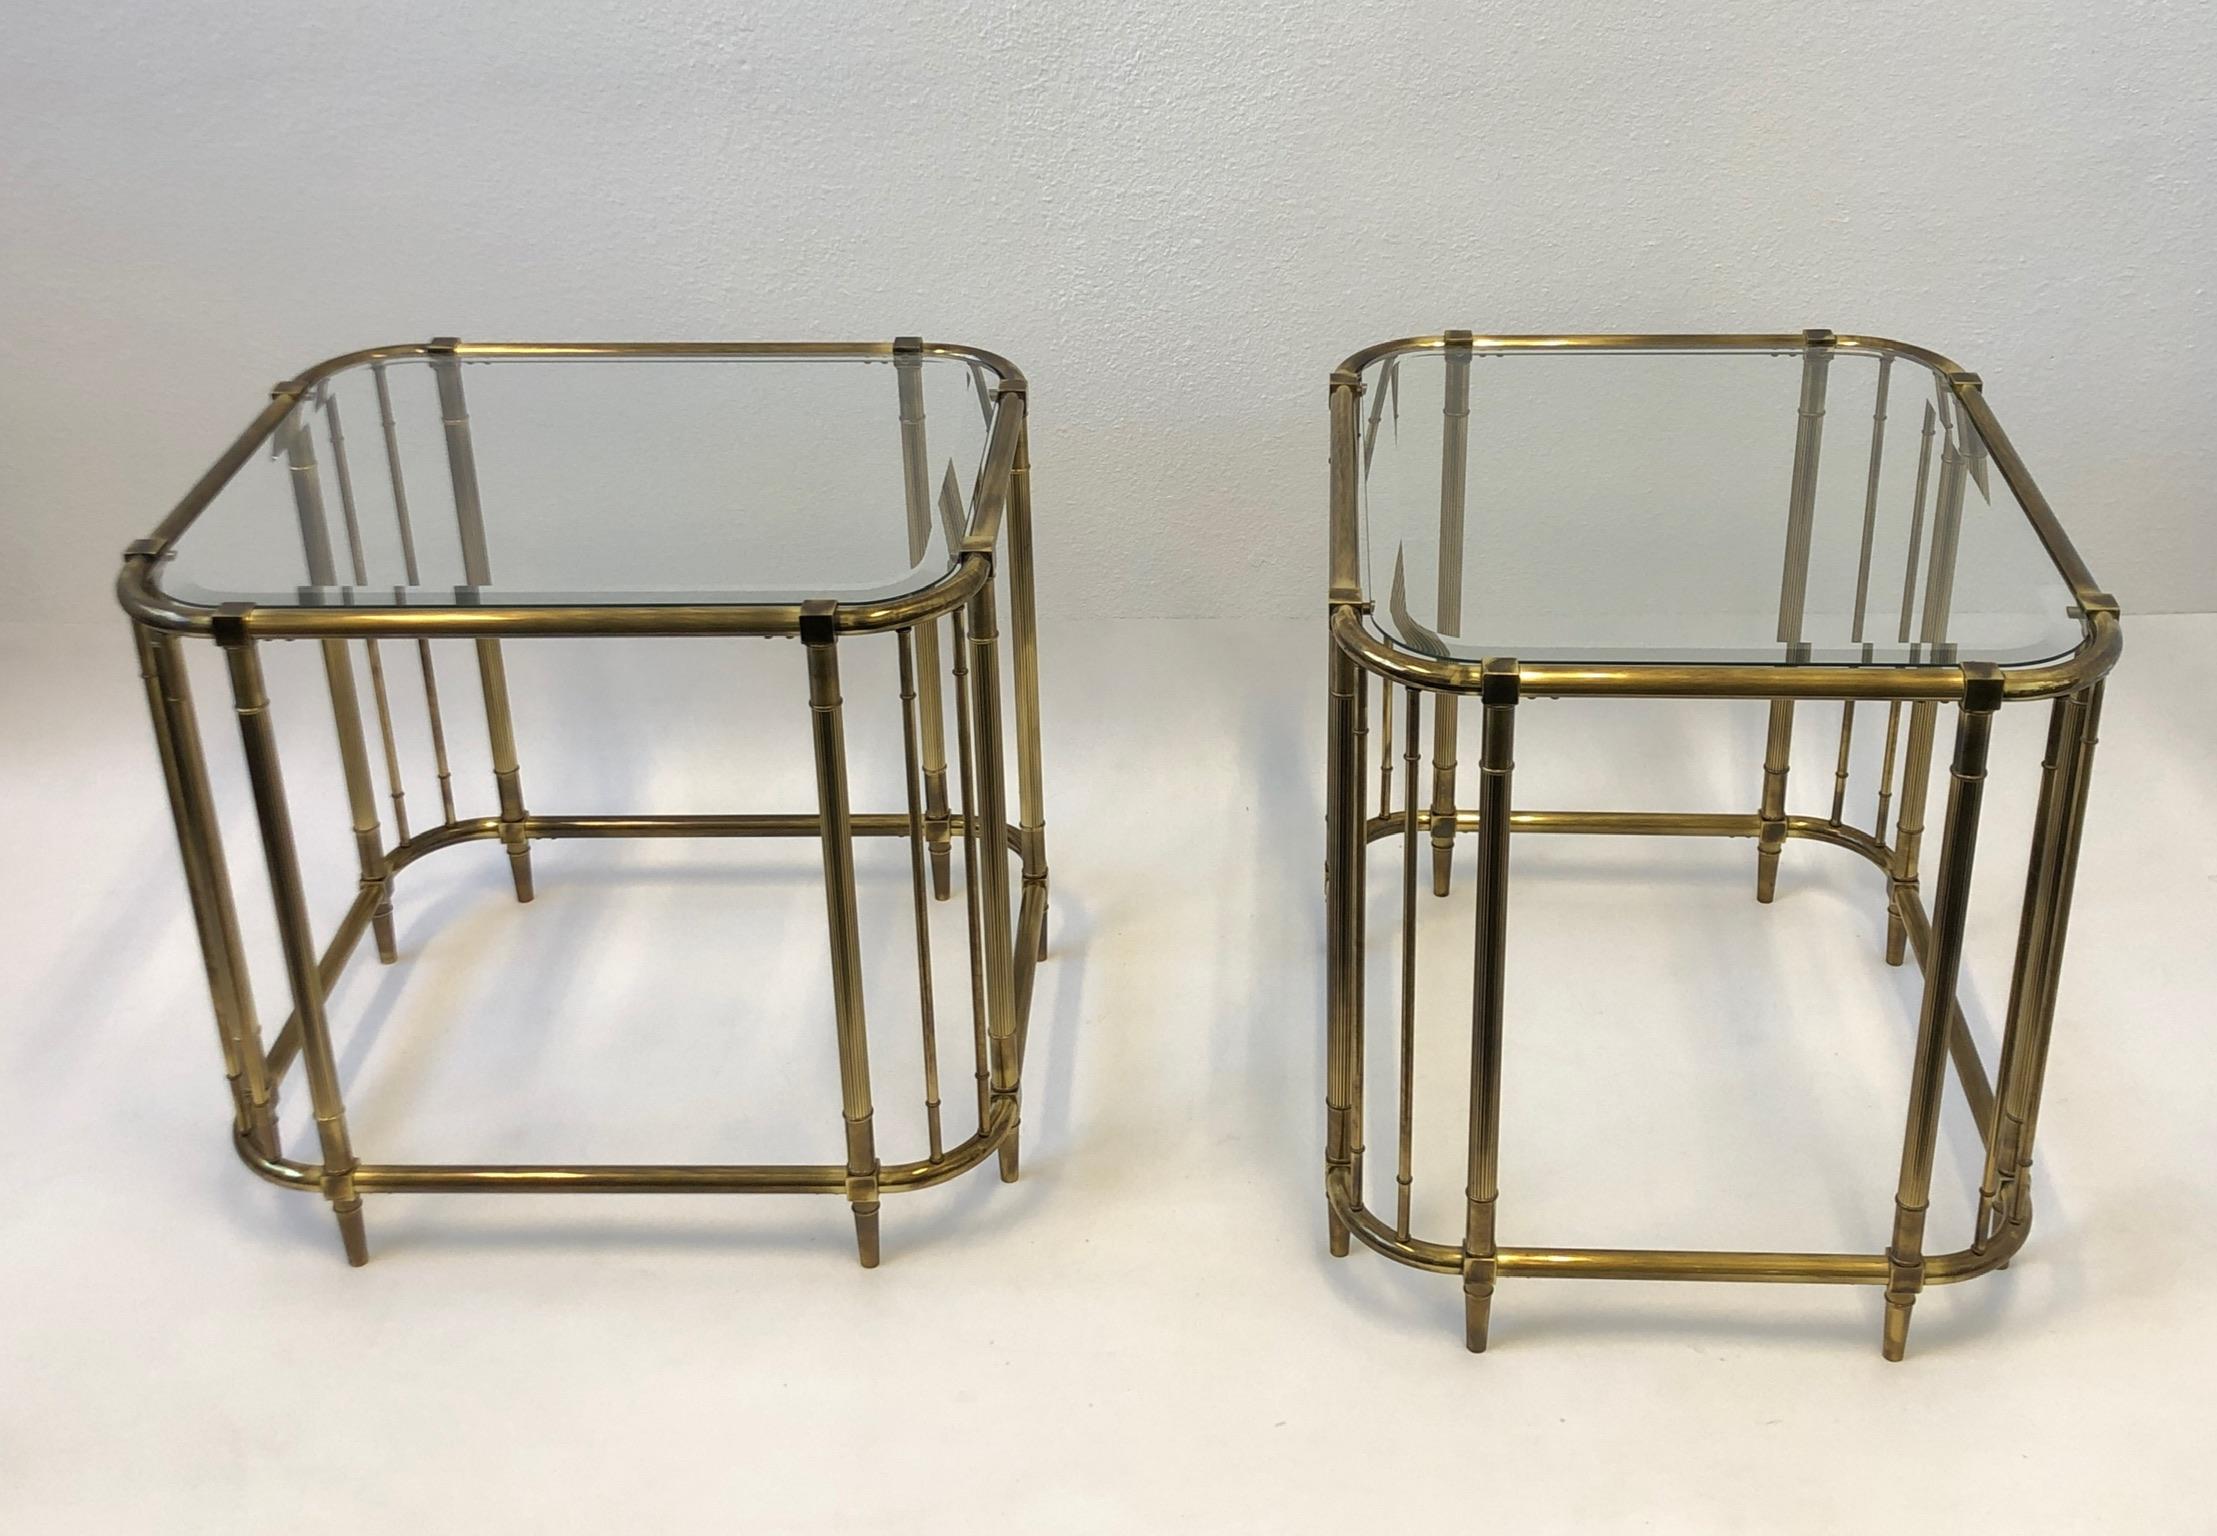 Rare pair of solid brass and beveled glass side tables designed by Mastercraft in the 1970s. The tables retain the original aged brass finish that Mastercraft is known for (see detail photos). This can be used as nightstand if